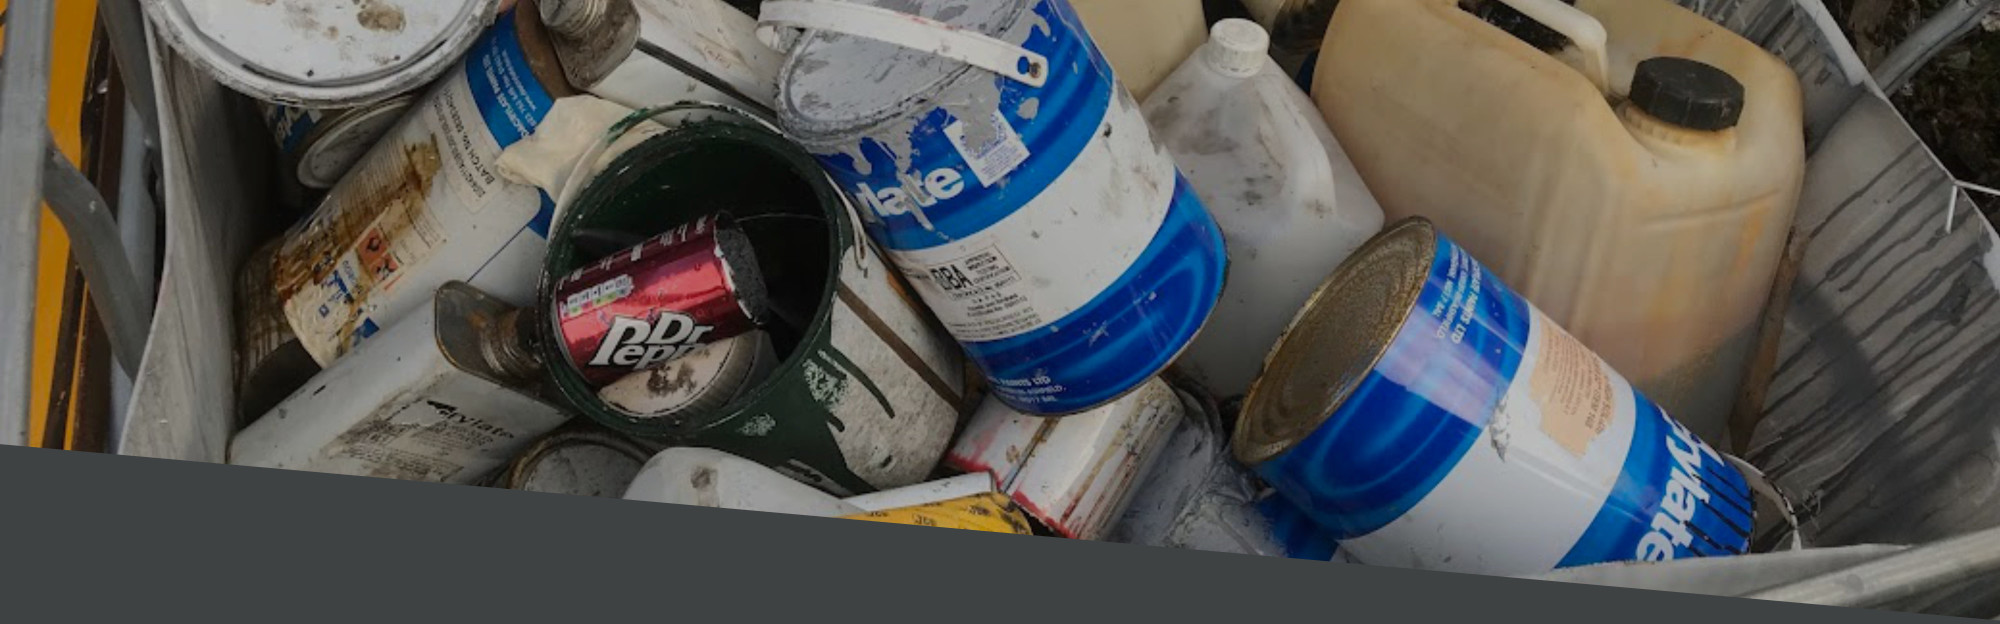 Artemes Waste Solutions - Hazardous Waste Removal